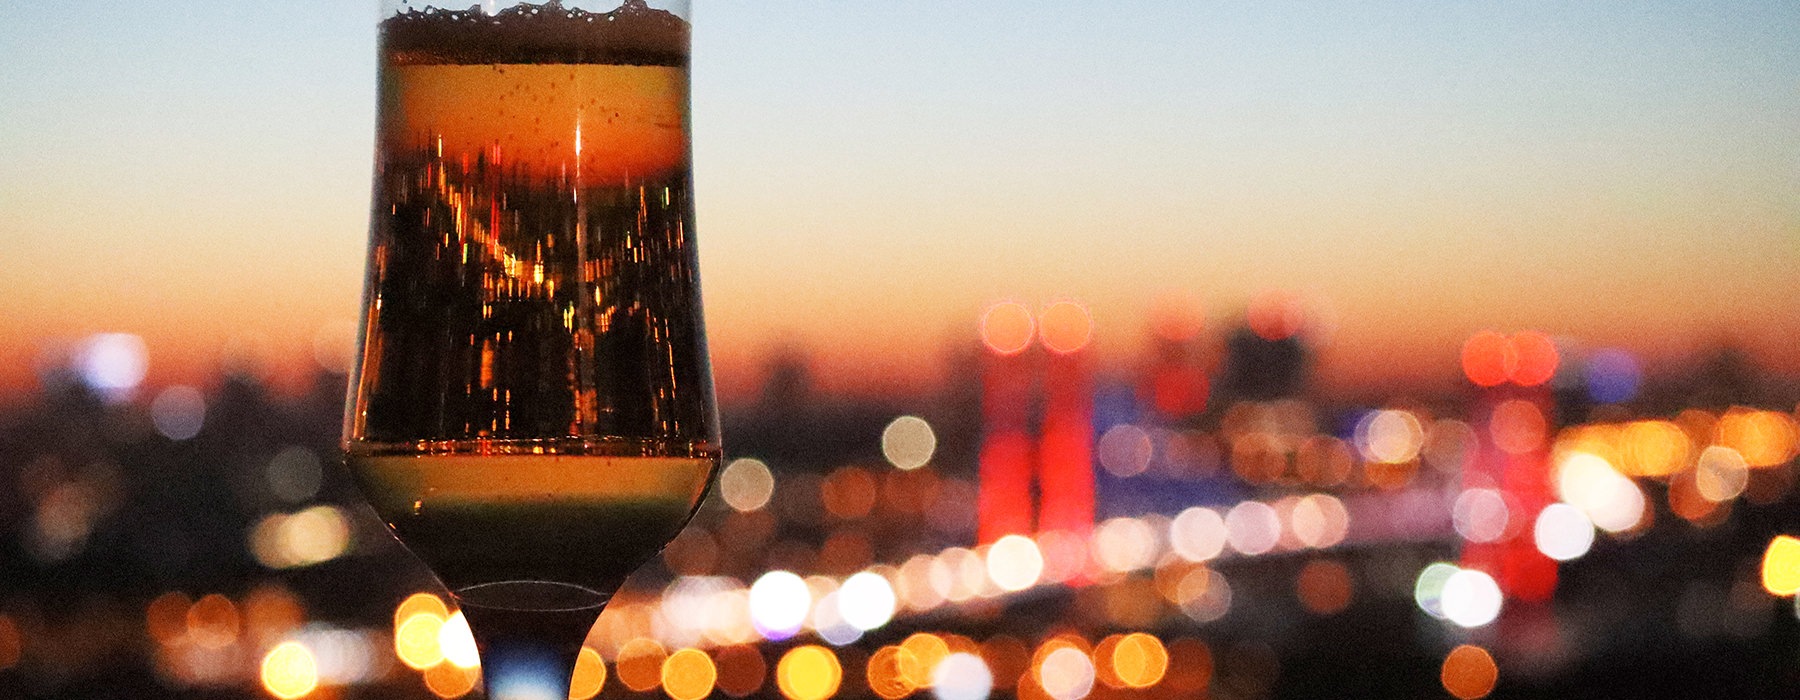 champagne glass with city view in background